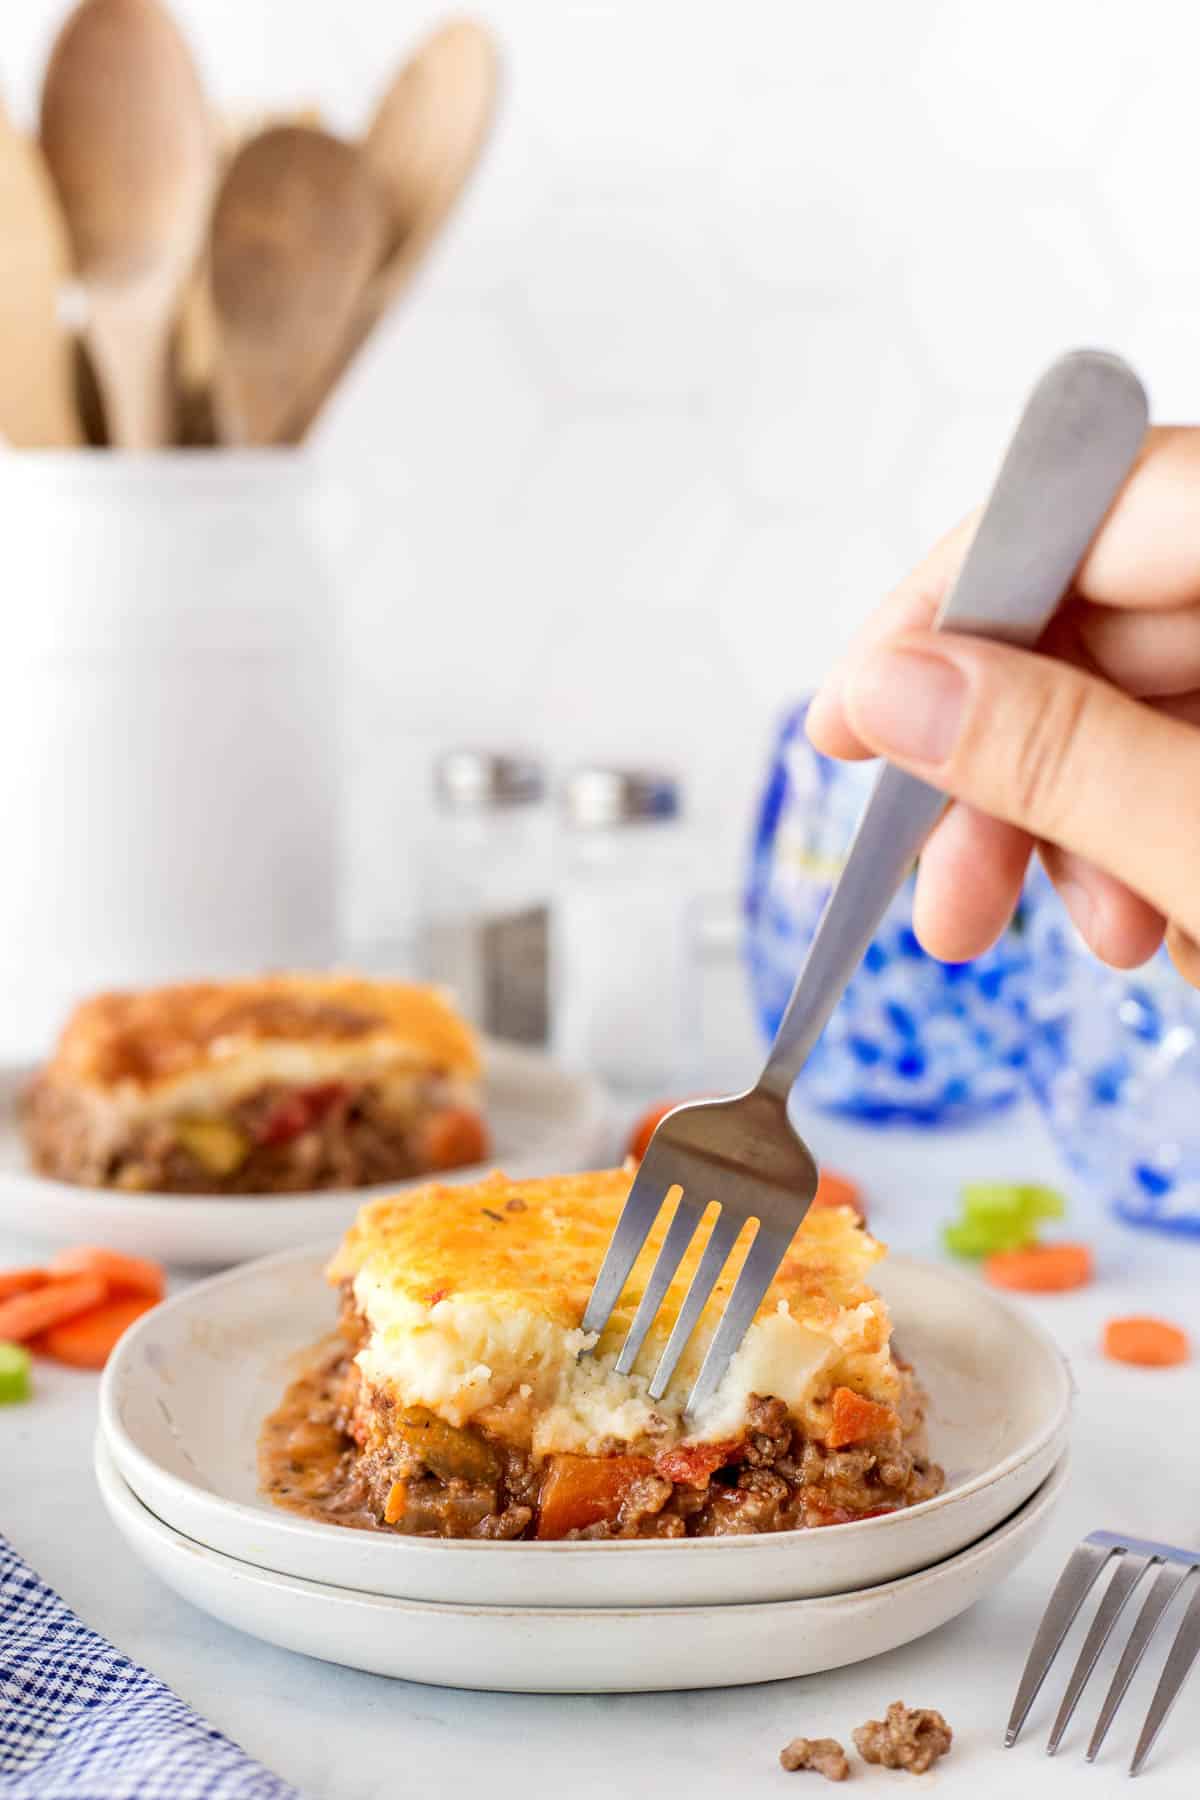 Taking a forkful of cottage pie